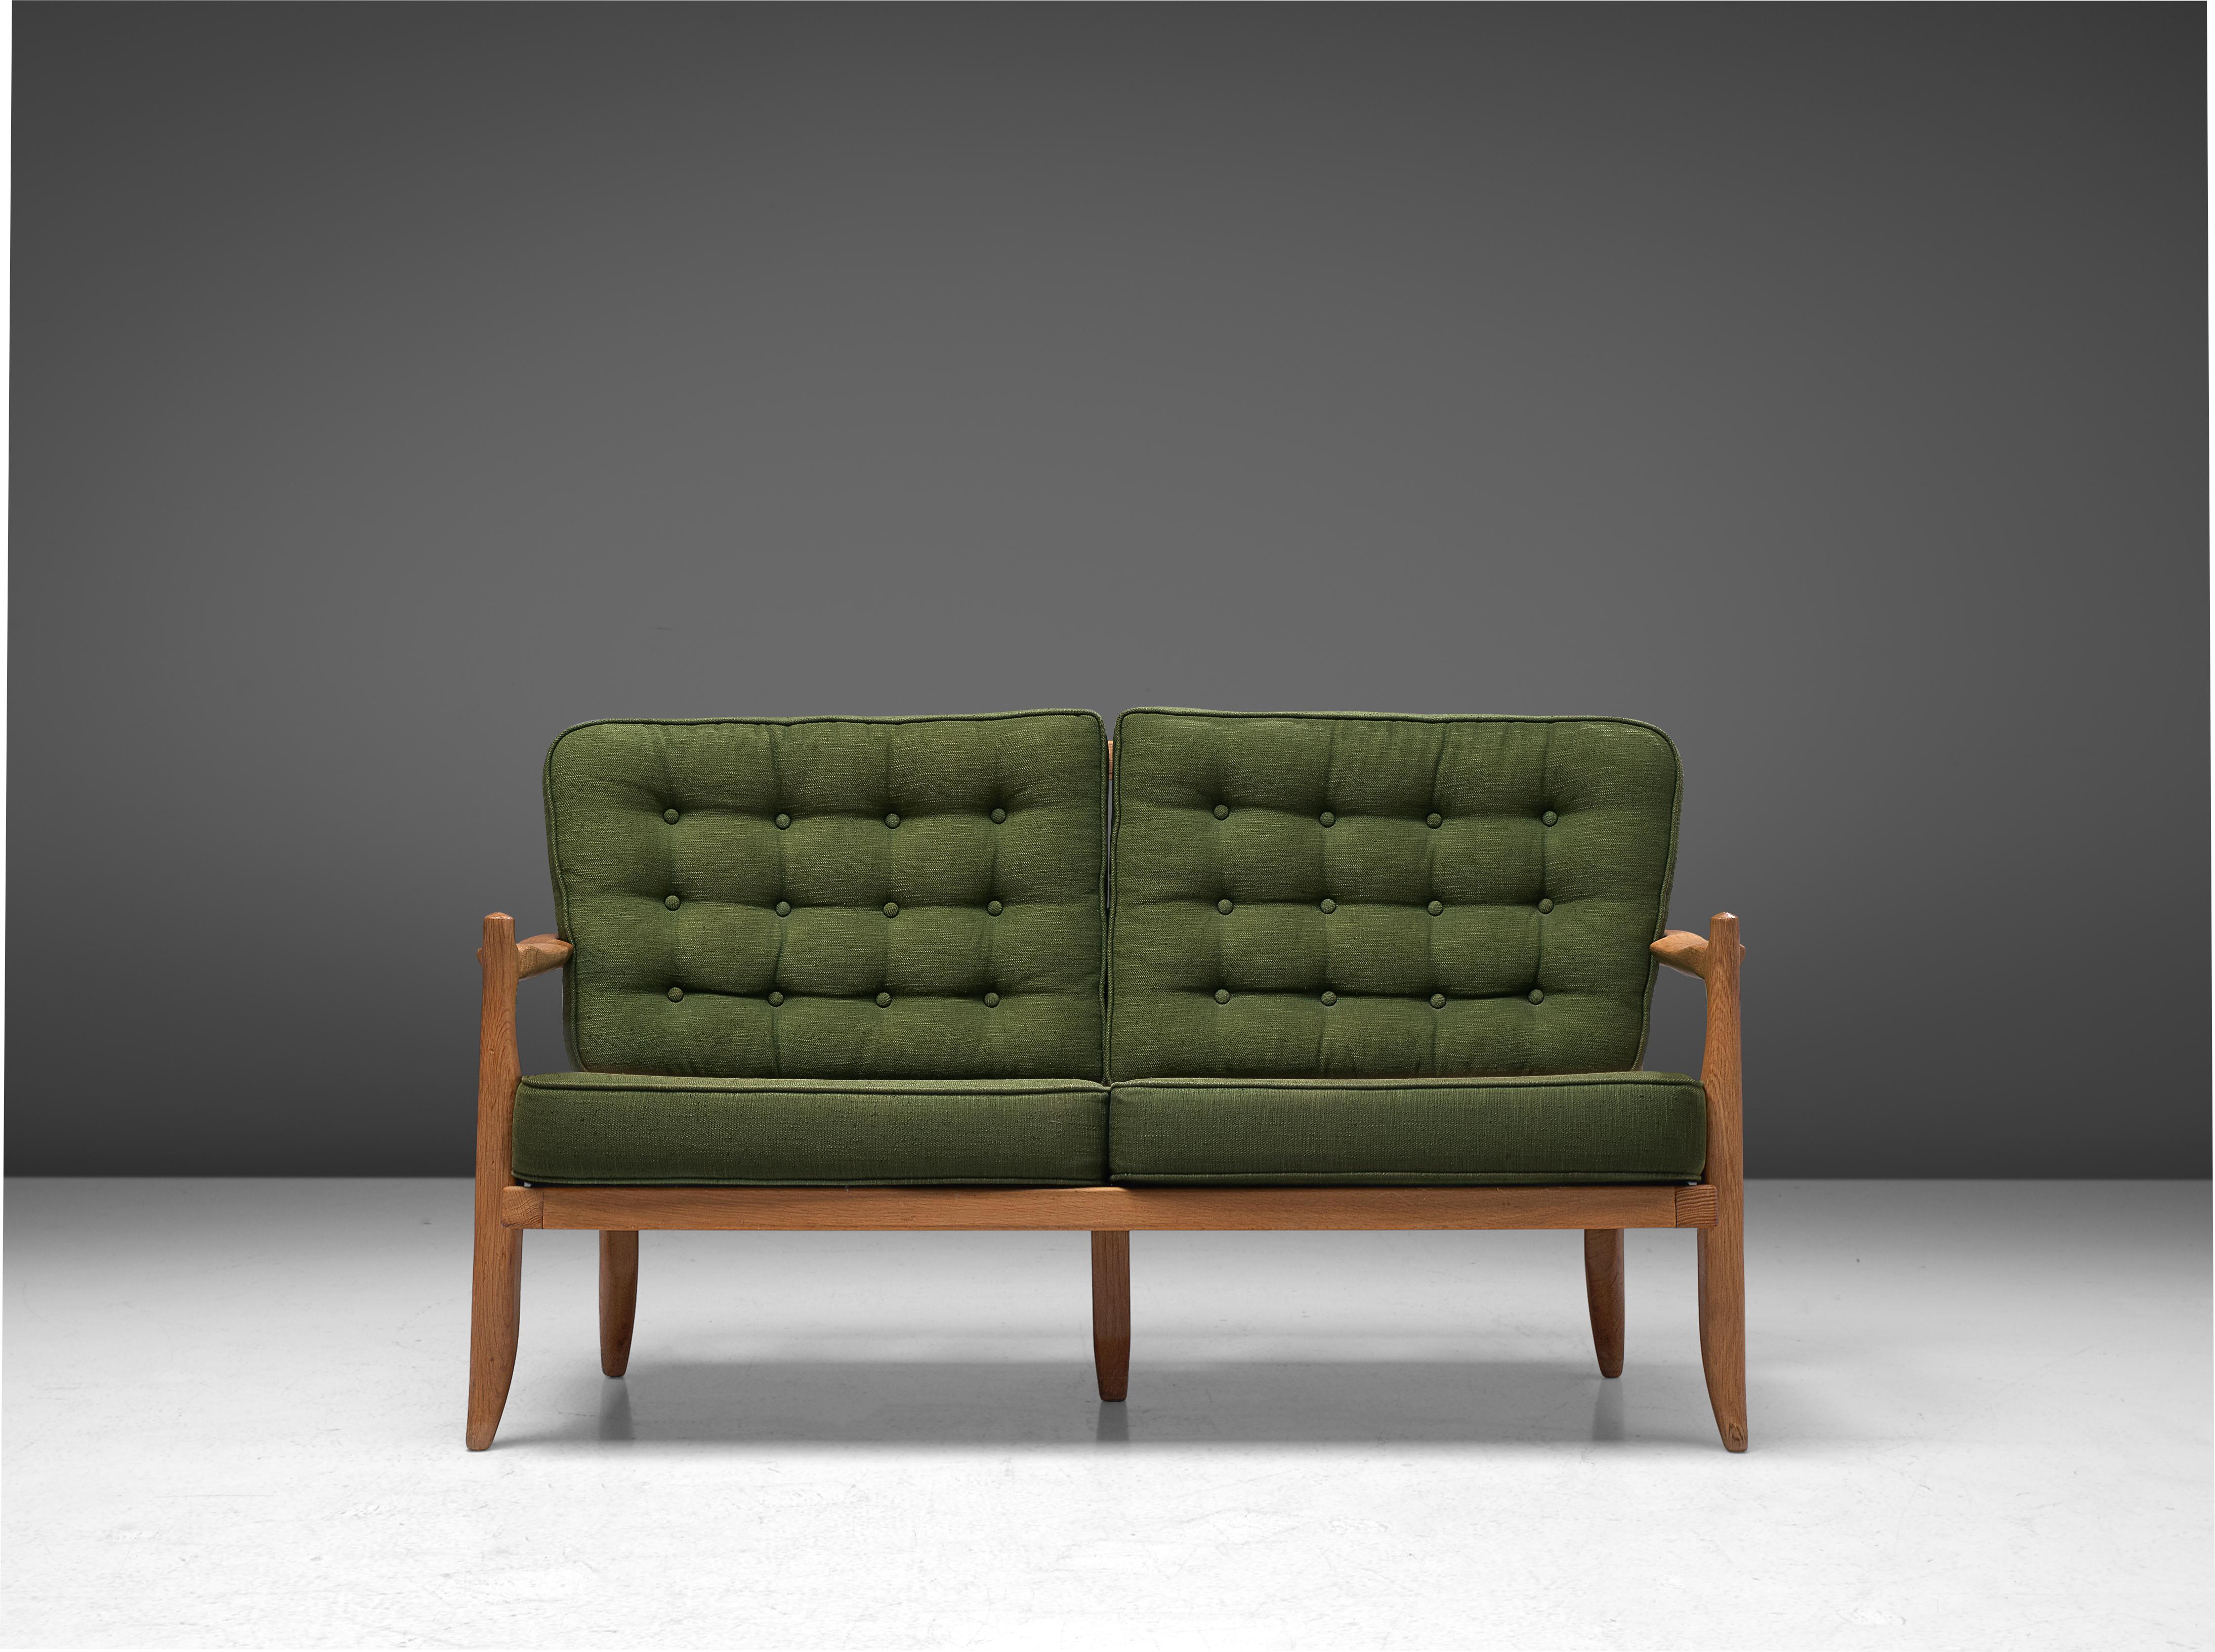 Mid-20th Century Guillerme et Chambron Sofa in Moss Green Upholstery